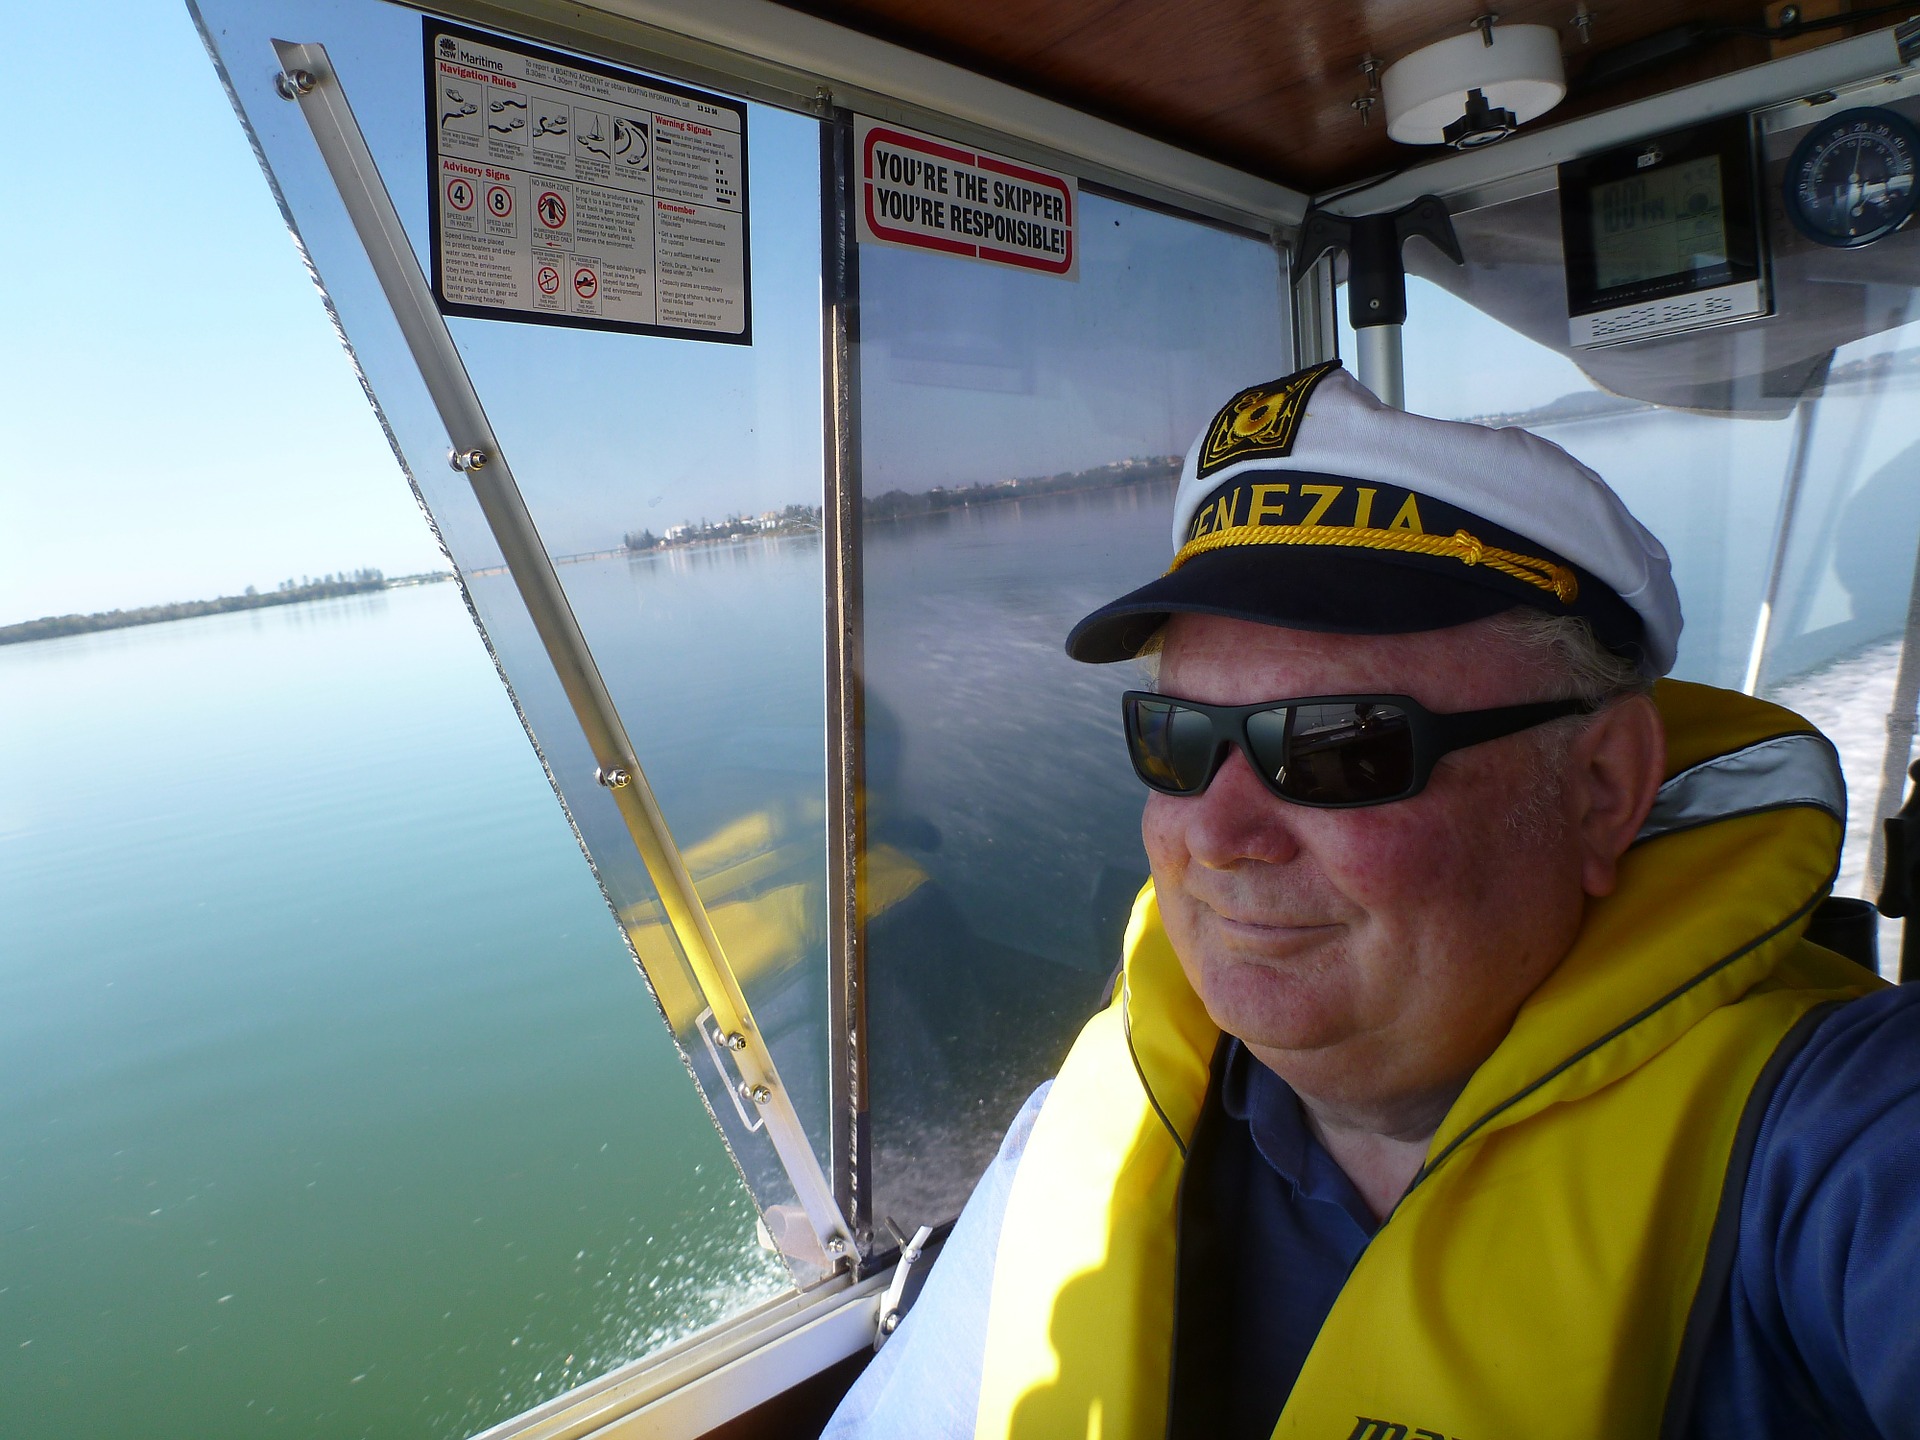 A 60-something man in a captain's hat takes the helm.